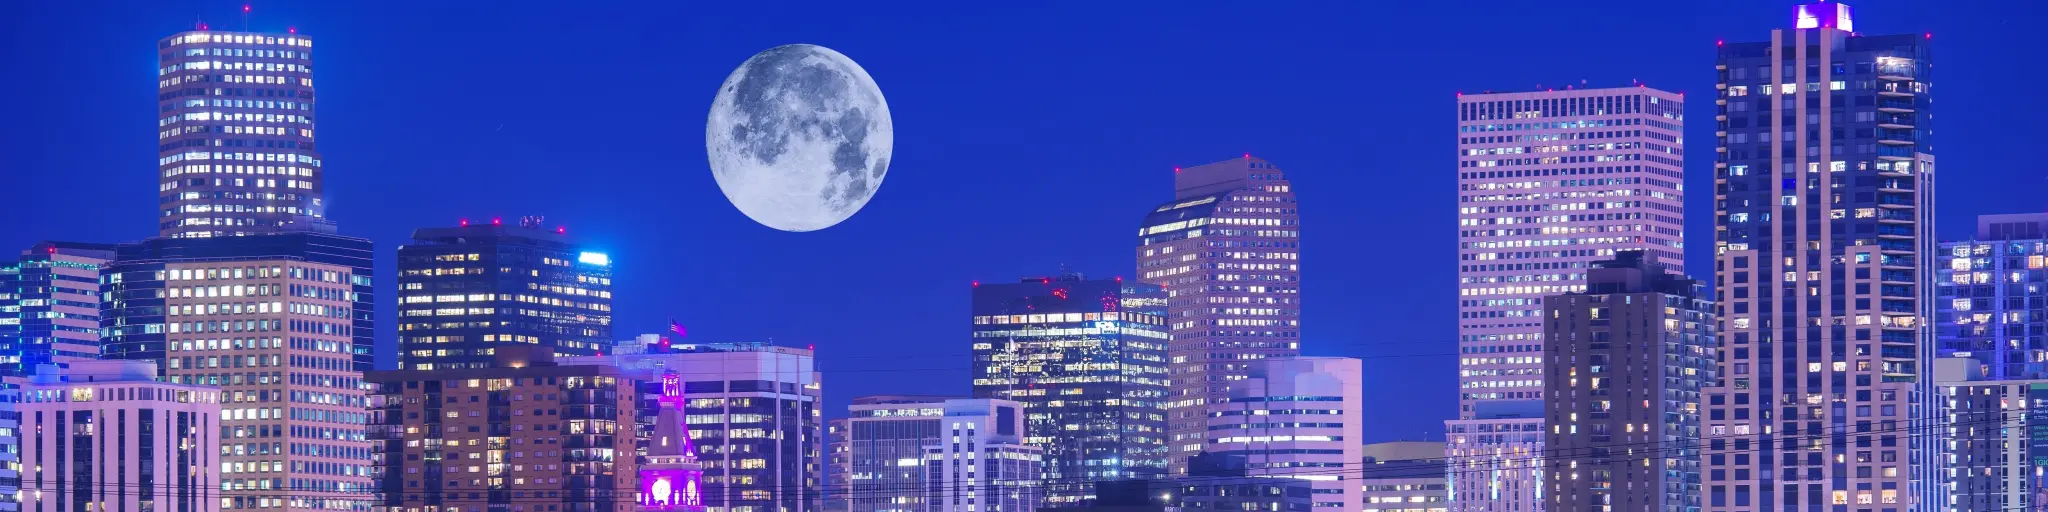 Denver skyline with lights on in the buildings and a big full moon in the sky